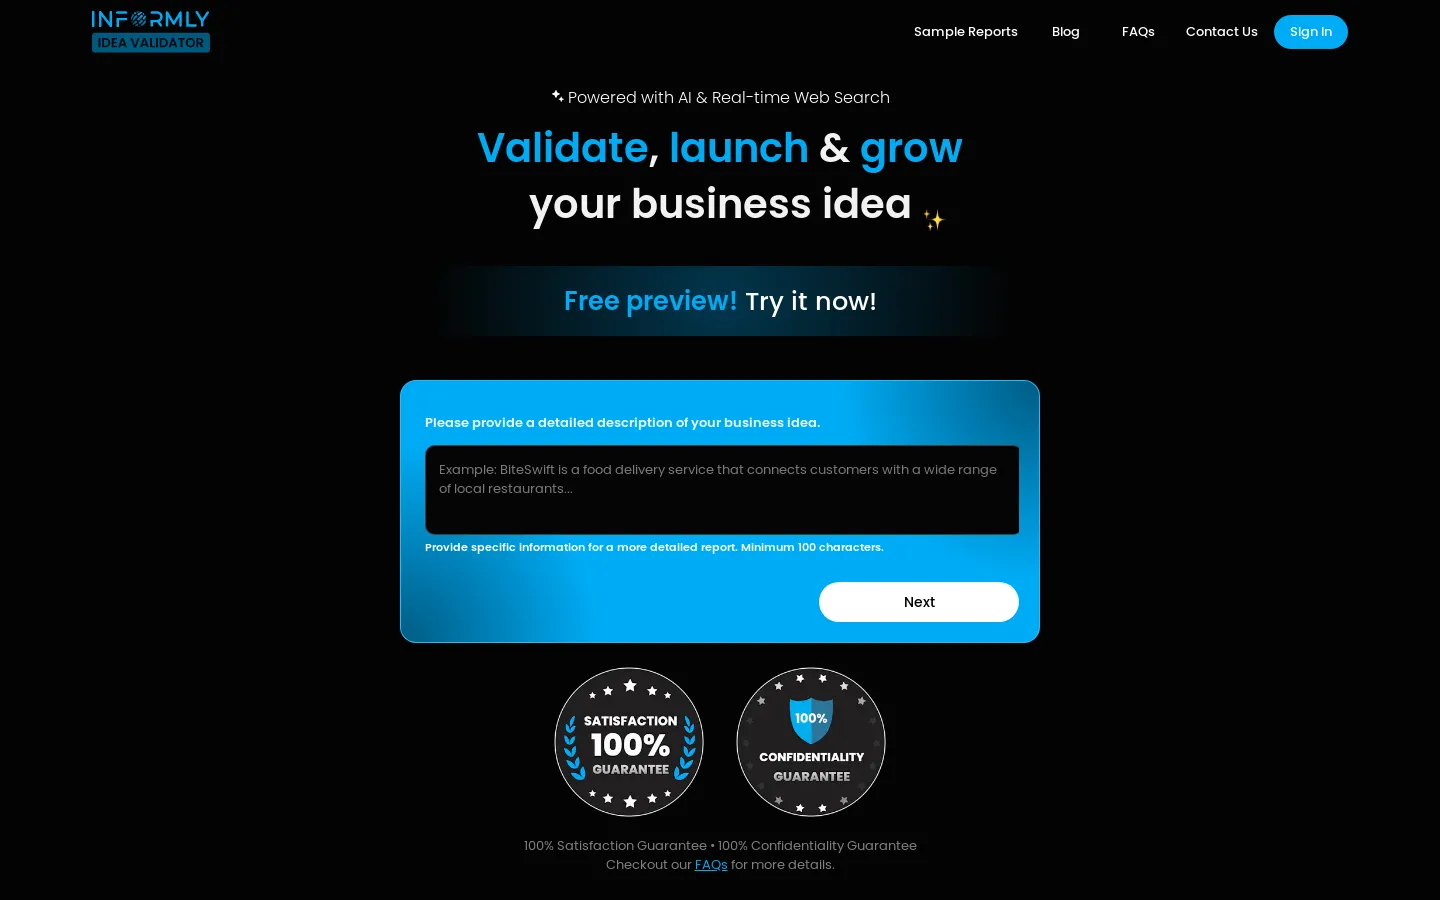 Idea Validator • Informly • Validate your Business Idea instantly with the help of AI